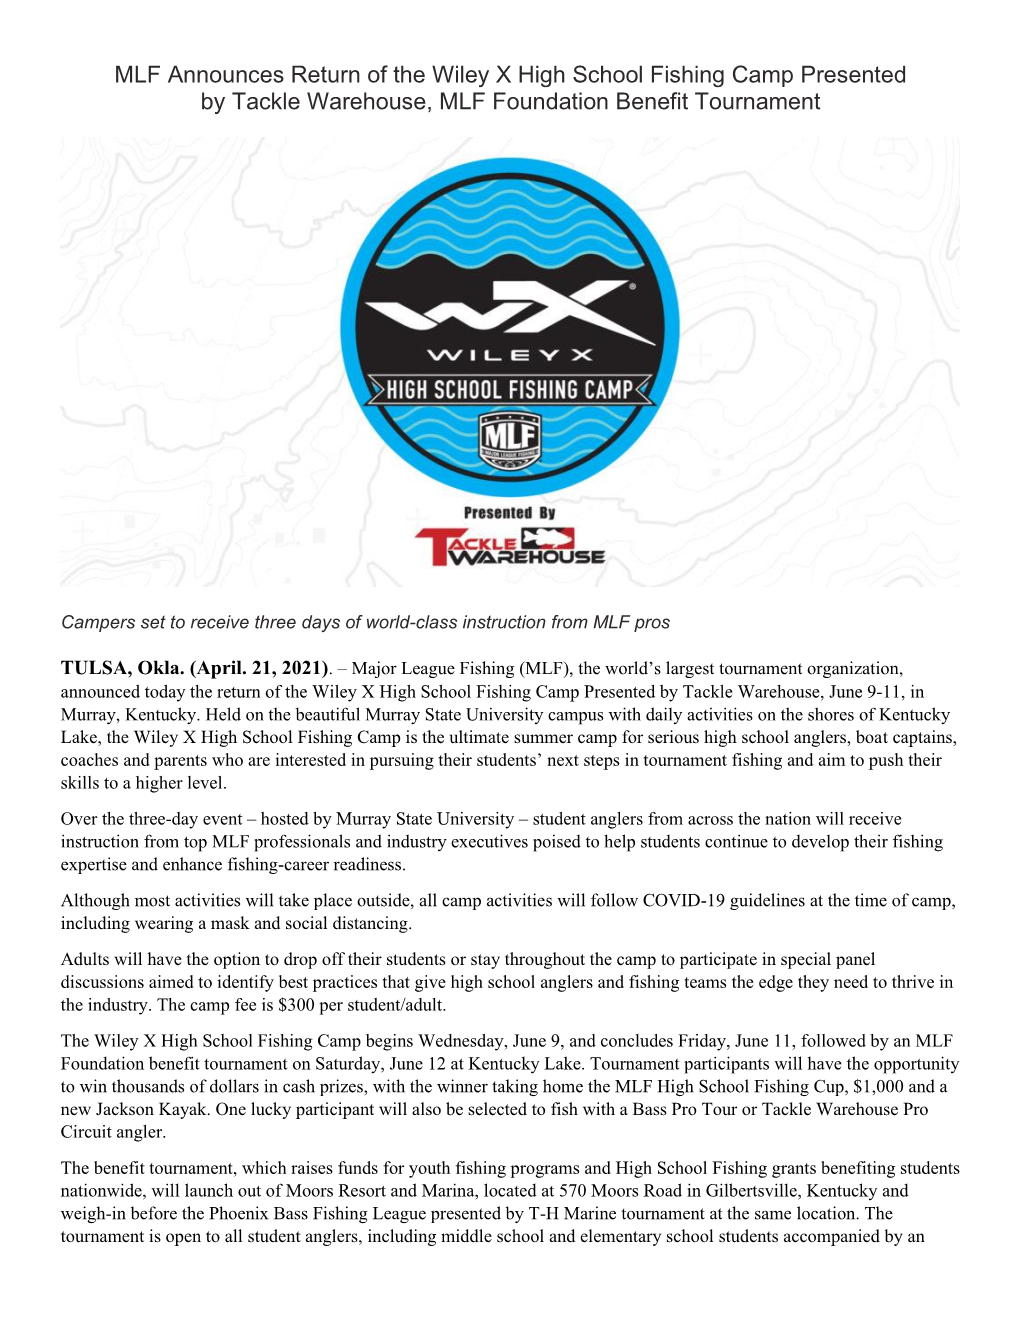 MLF Announces Return of the Wiley X High School Fishing Camp Presented by Tackle Warehouse, MLF Foundation Benefit Tournament